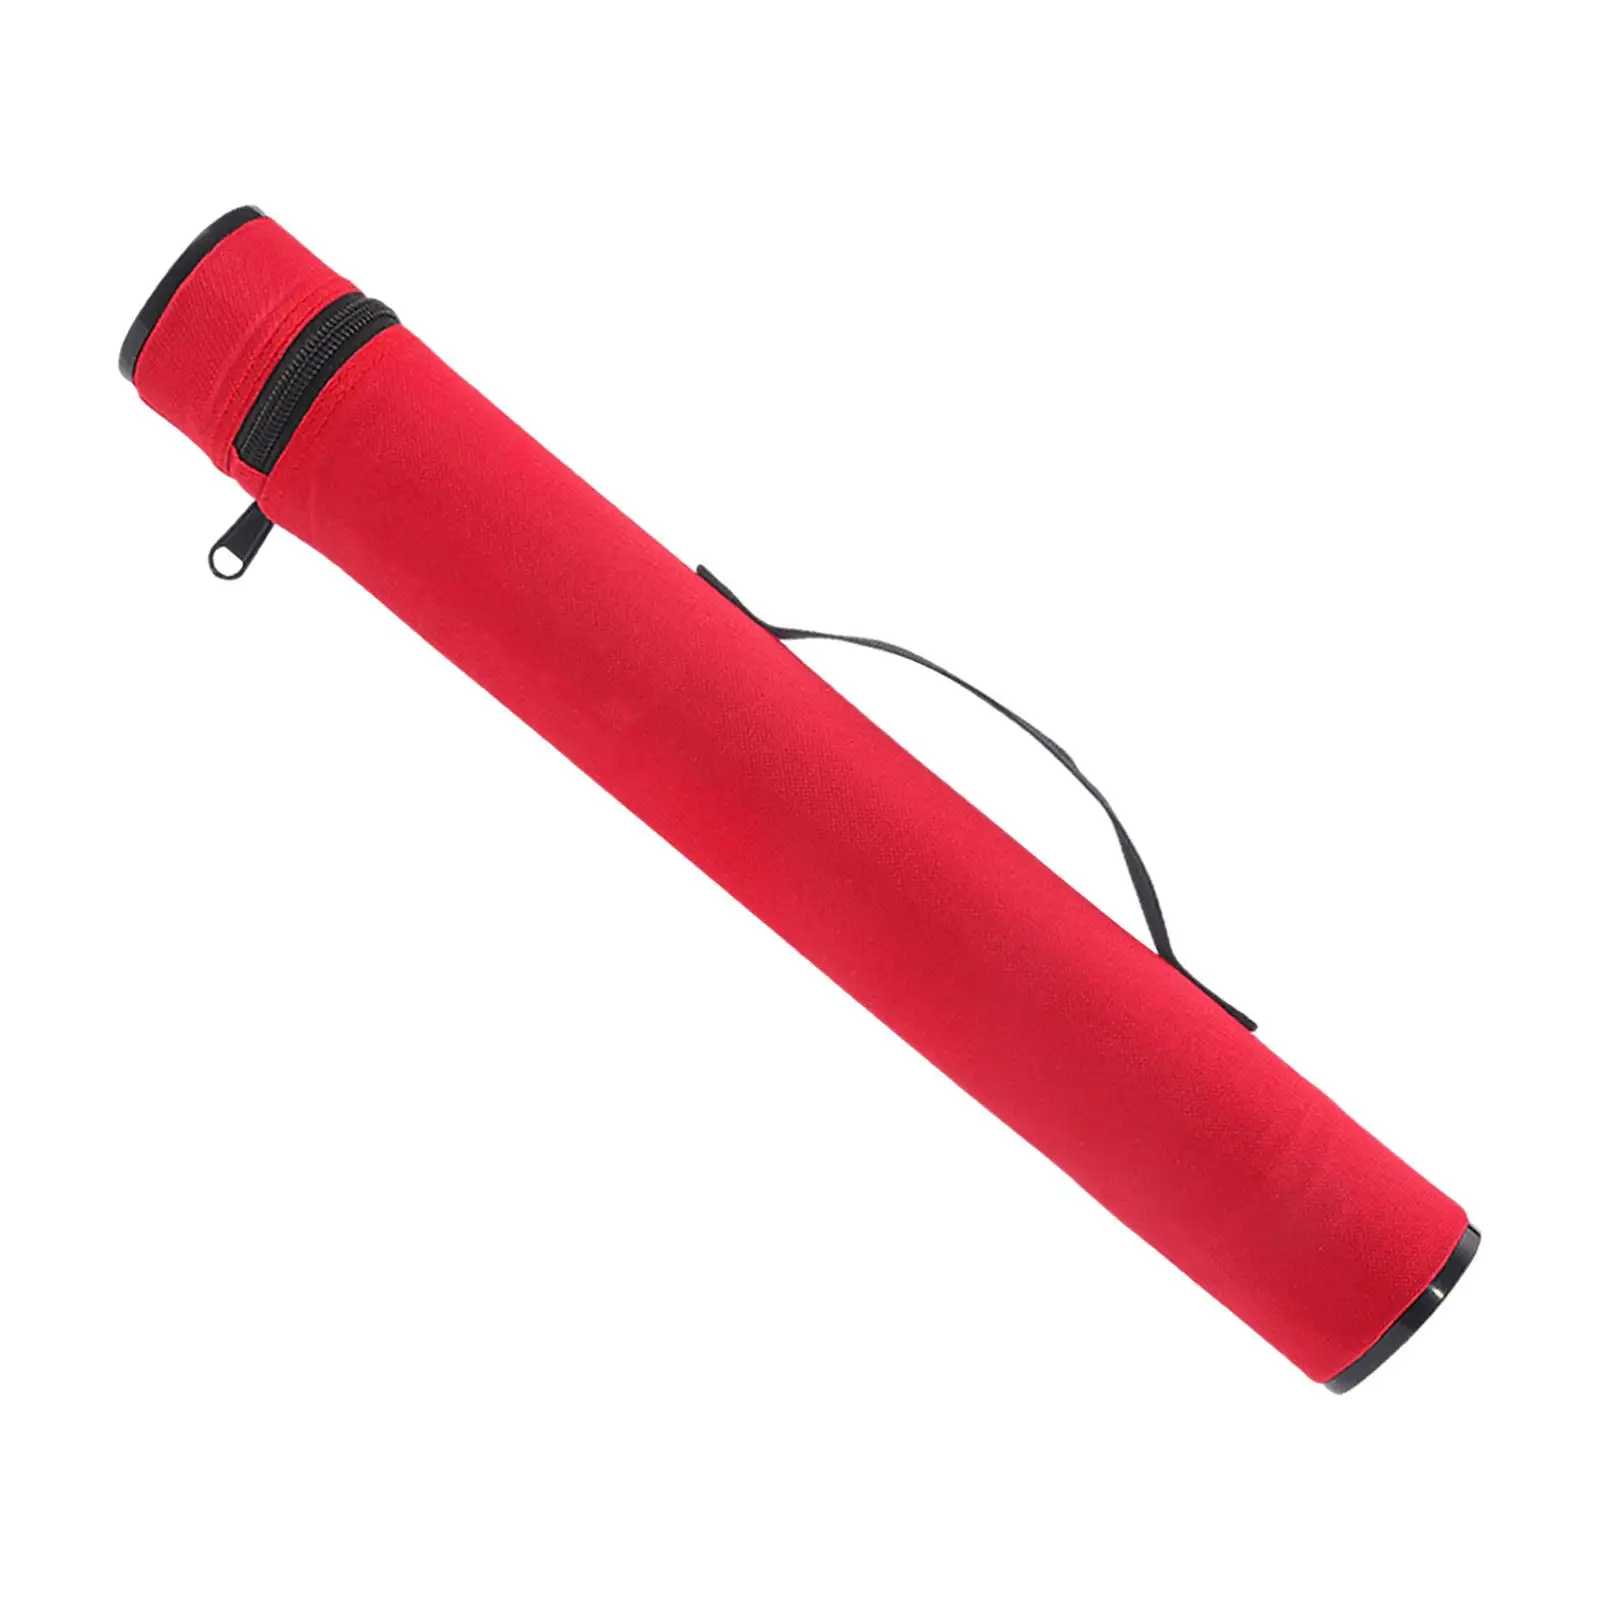 Fly Fishing Rods Case Accessories Protective Cover Wear Resistance with Shoulder Strap Fishing Pole Storage Bag Travel Case